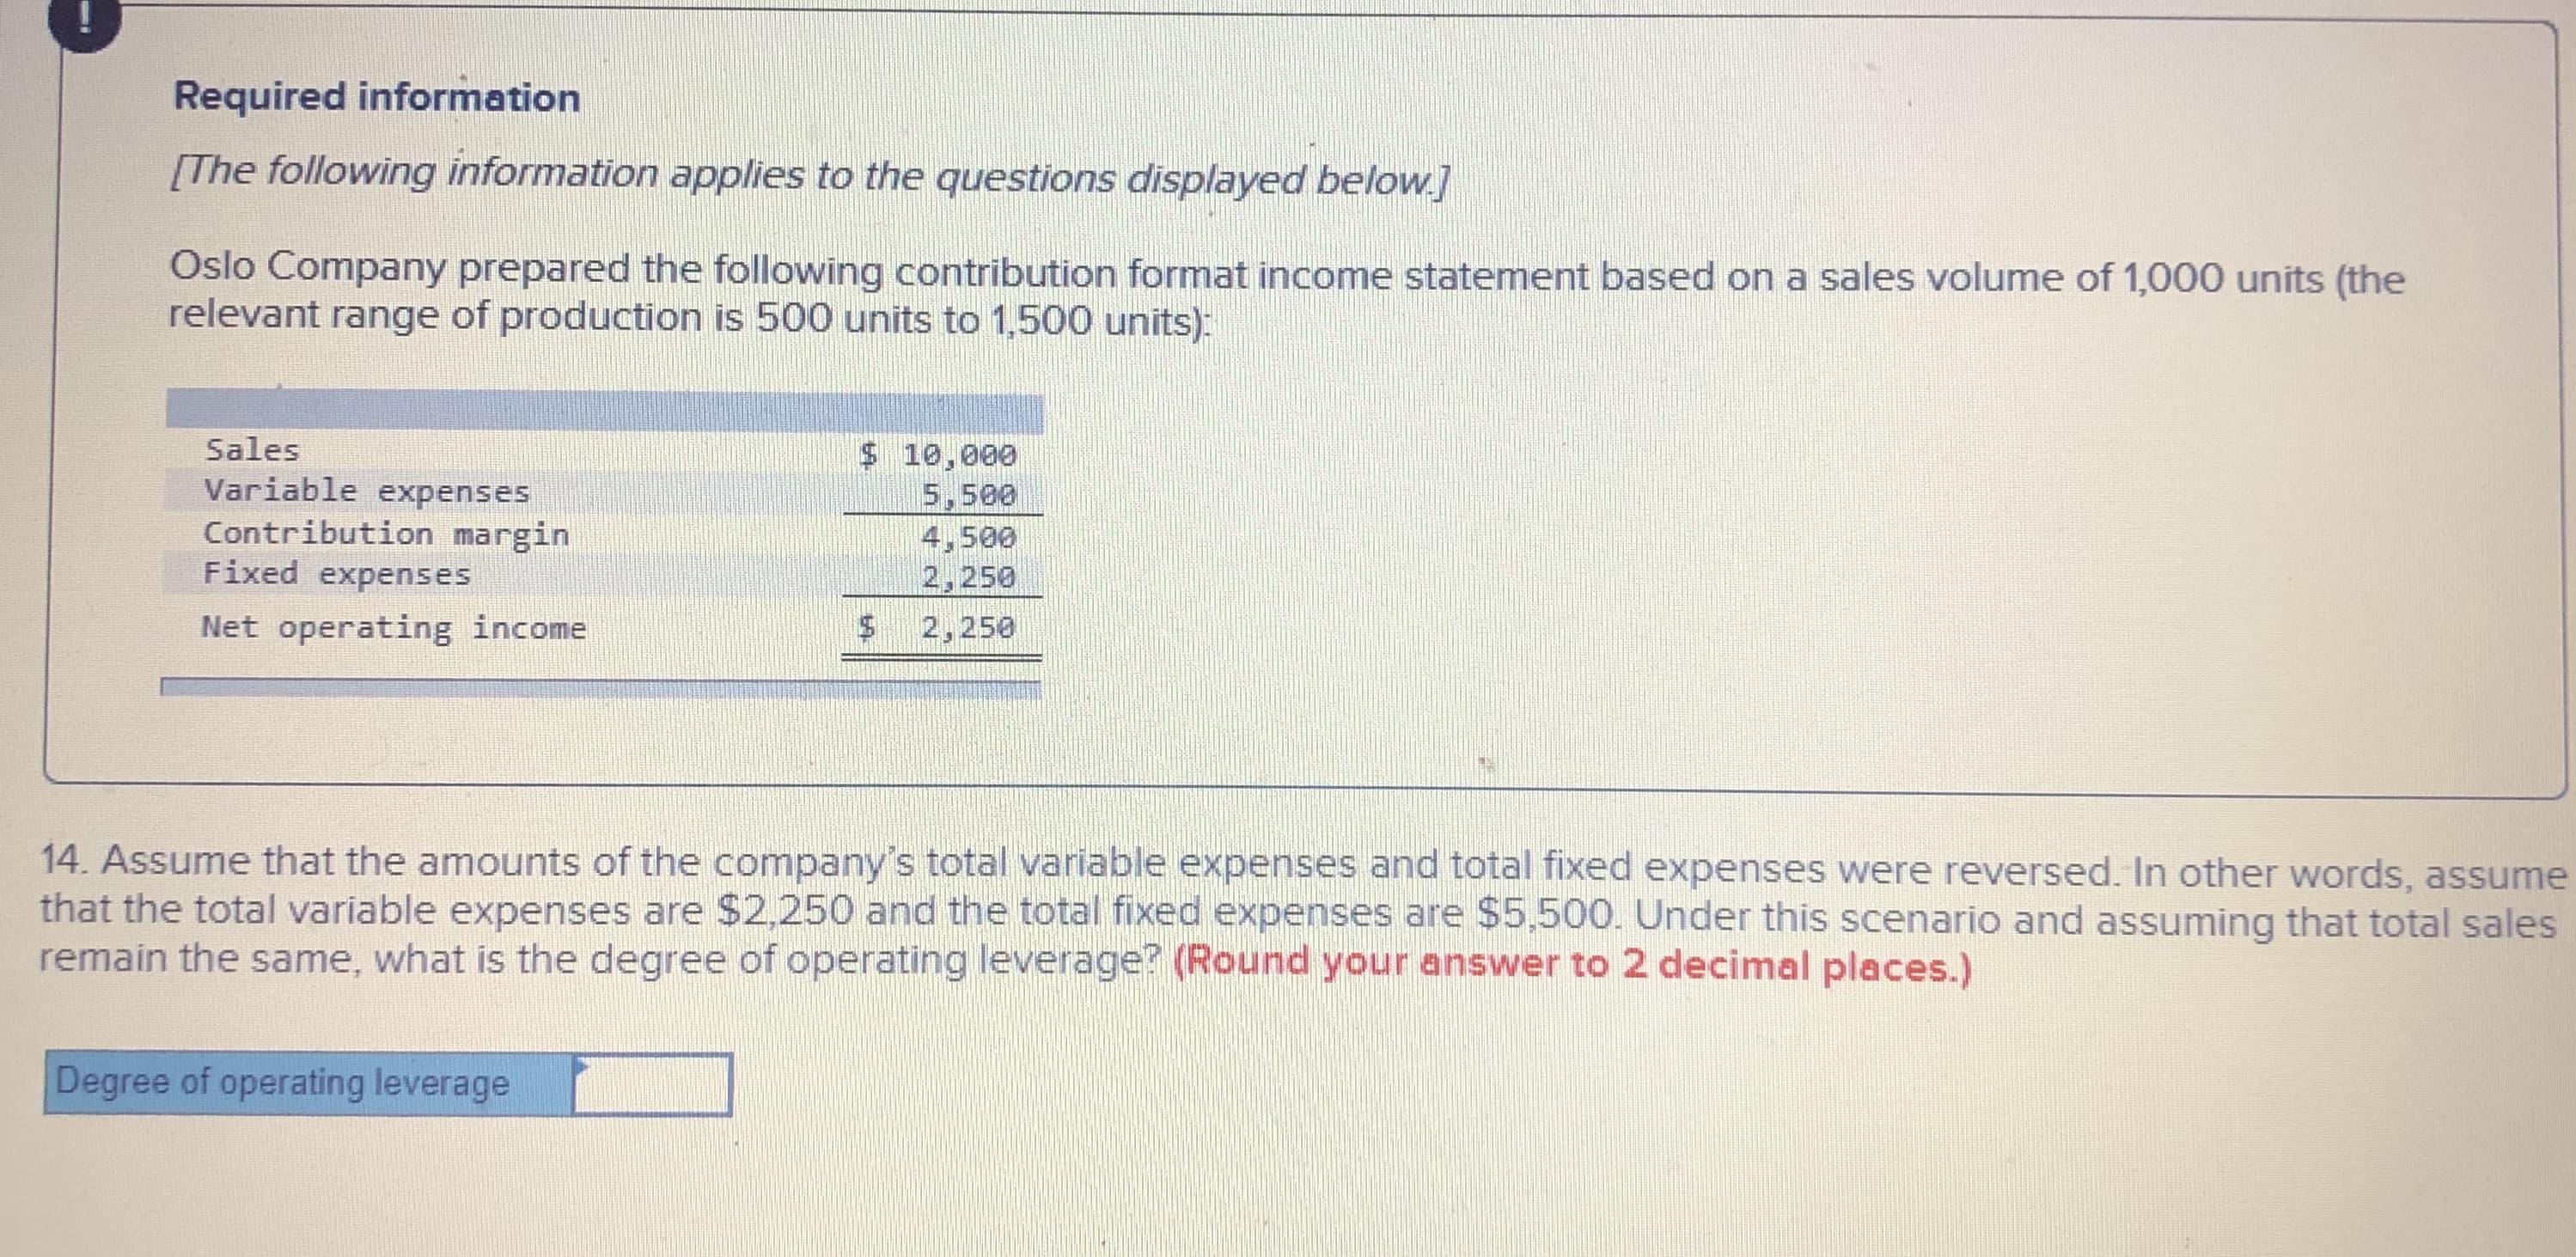 Required information
[The following information applies to the questions displayed below.]
Oslo Company prepared the following contribution format income statement based on a sales volume of 1,000 units (the
relevant range of production is 500 units to 1,500 units):
Sales
$ 10,000
5,500
Variable expenses
Contribution margin
Fixed expenses
4,500
2,250
Net operating income
2,250
14. Assume that the amounts of the company's total variable expenses and total fixed expenses were reversed. In other words, assume
that the total variable expenses are $2,250 and the total fixed expenses are $5,500. Under this scenario and assuming that total sales
remain the same, what is the degree of operating leverage? (Round your answer to 2 decimal places.)
Degree of operating leverage
